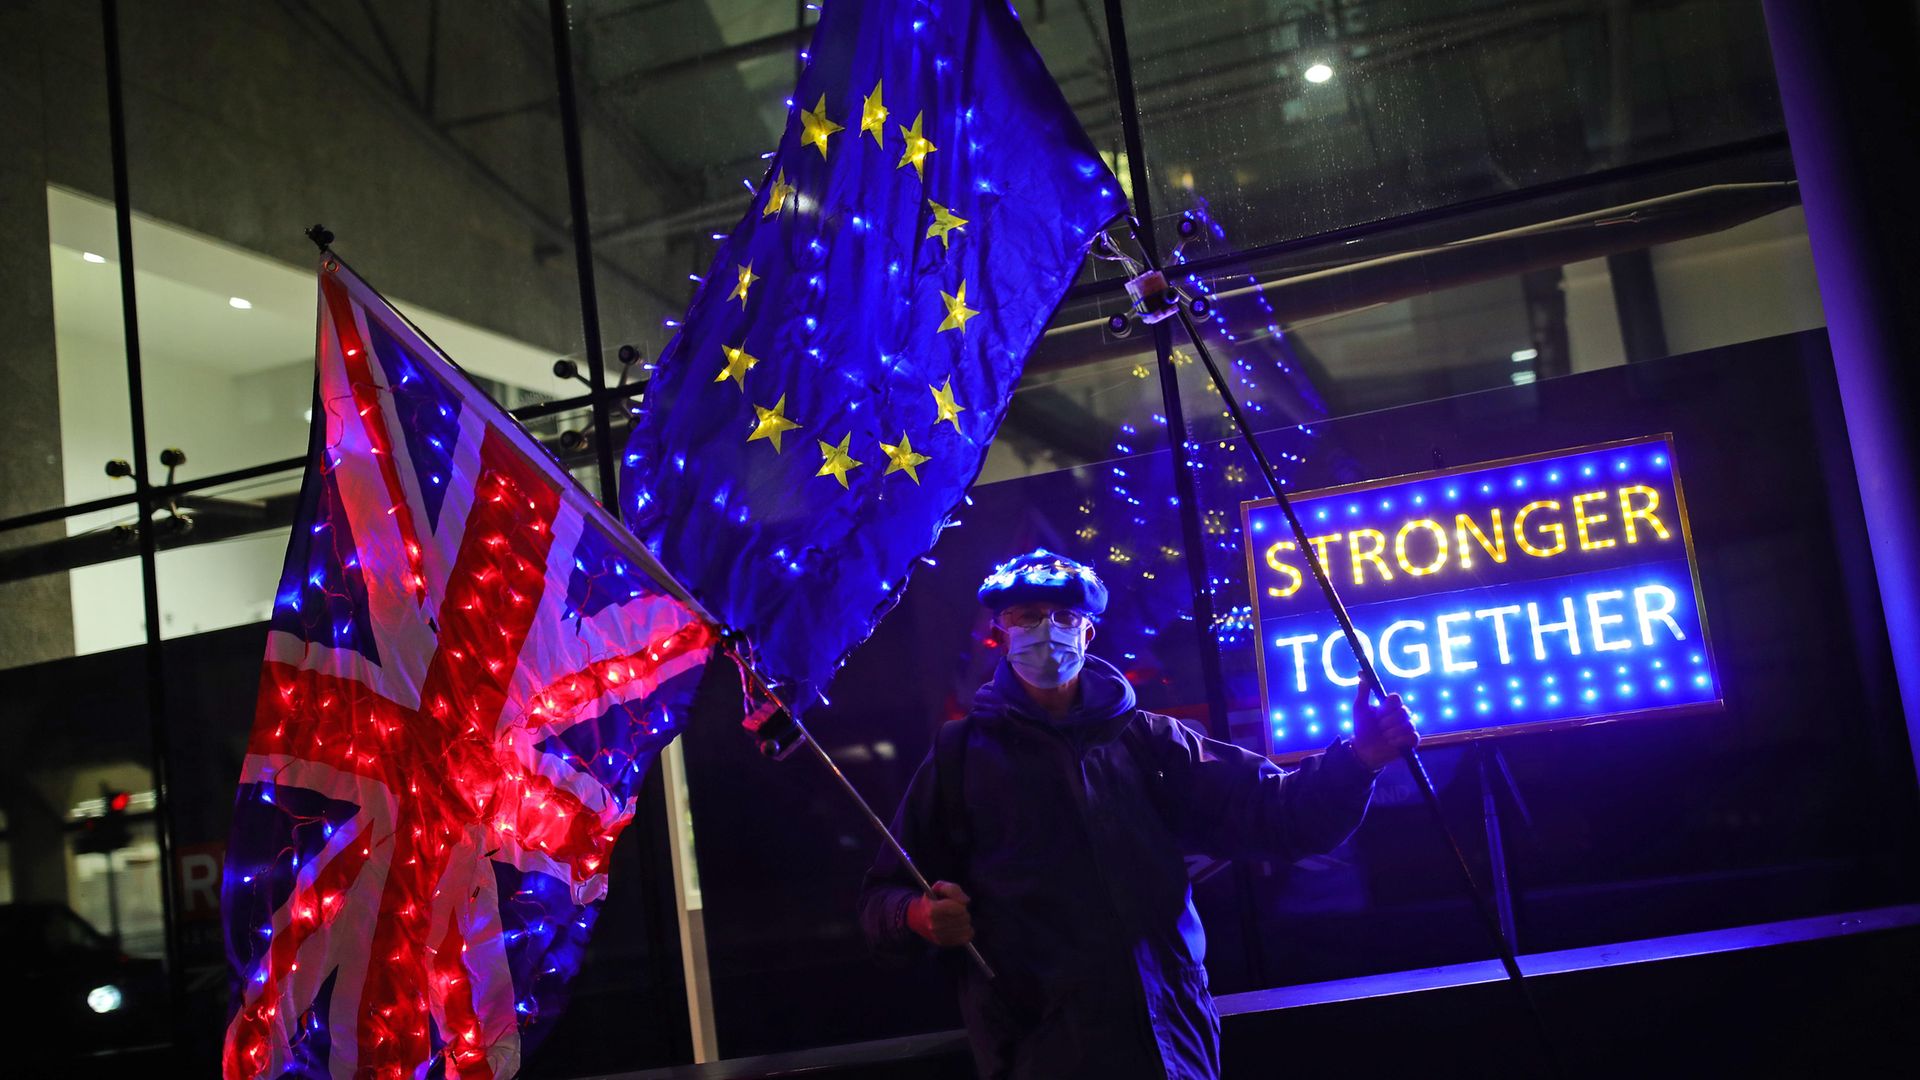 Pro-European protesters campaigning to keep strong links with the EU - Credit: PA